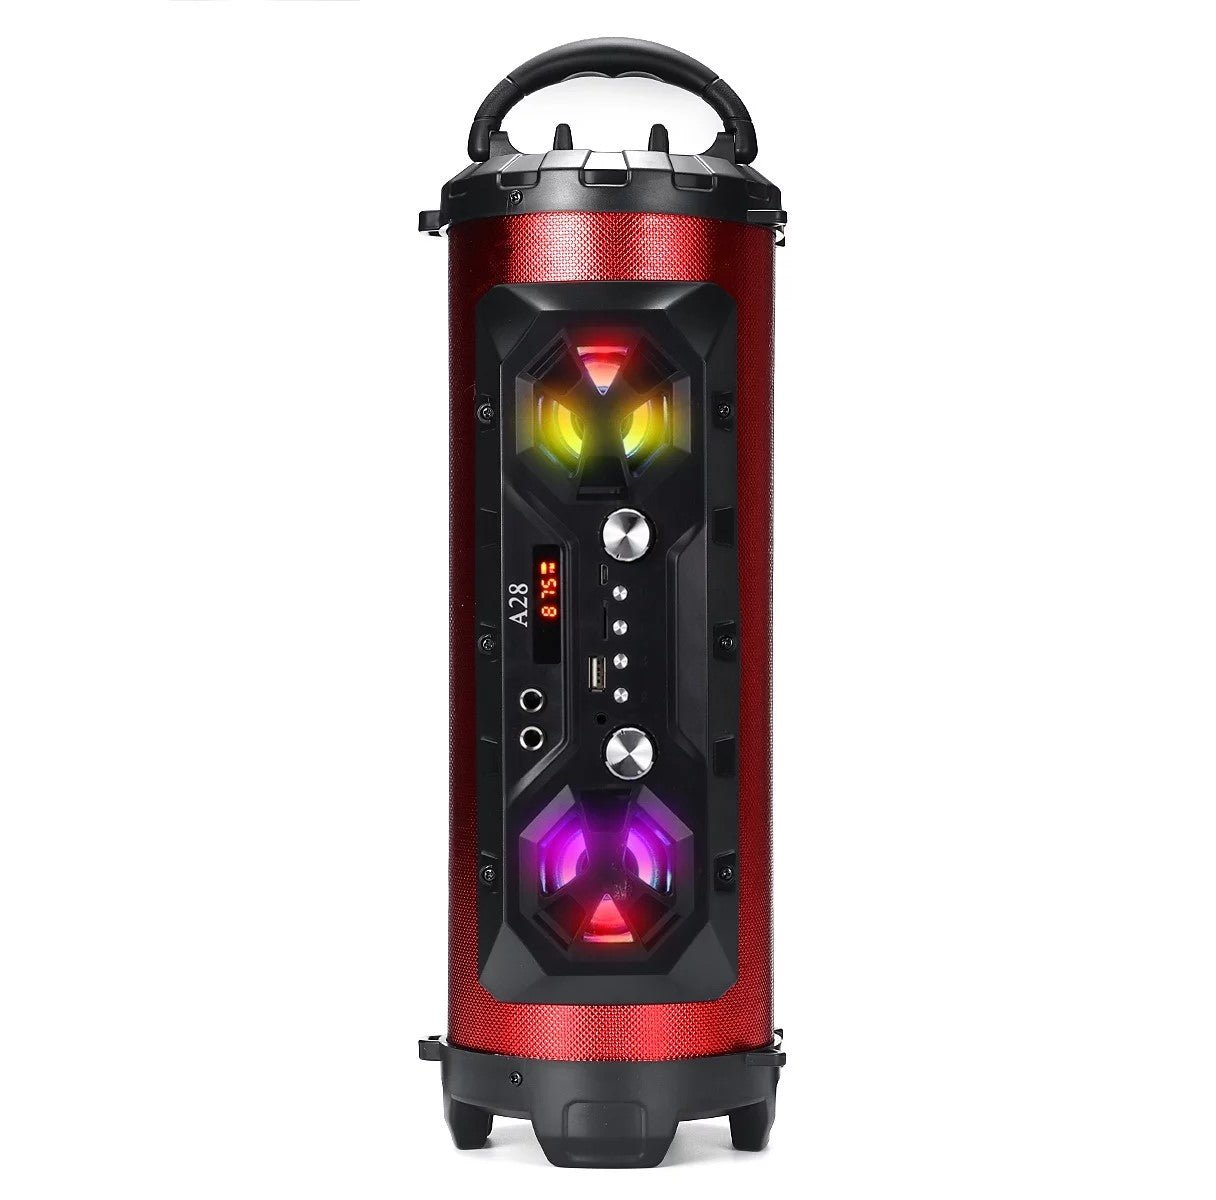 Red Portable Bluetooth Speakers, Bluetooth Boombox with Subwoofer, FM Radio RGB EQ Stereo Sound Bass Wireless Indoor/Outdoor Speaker - Office Catch